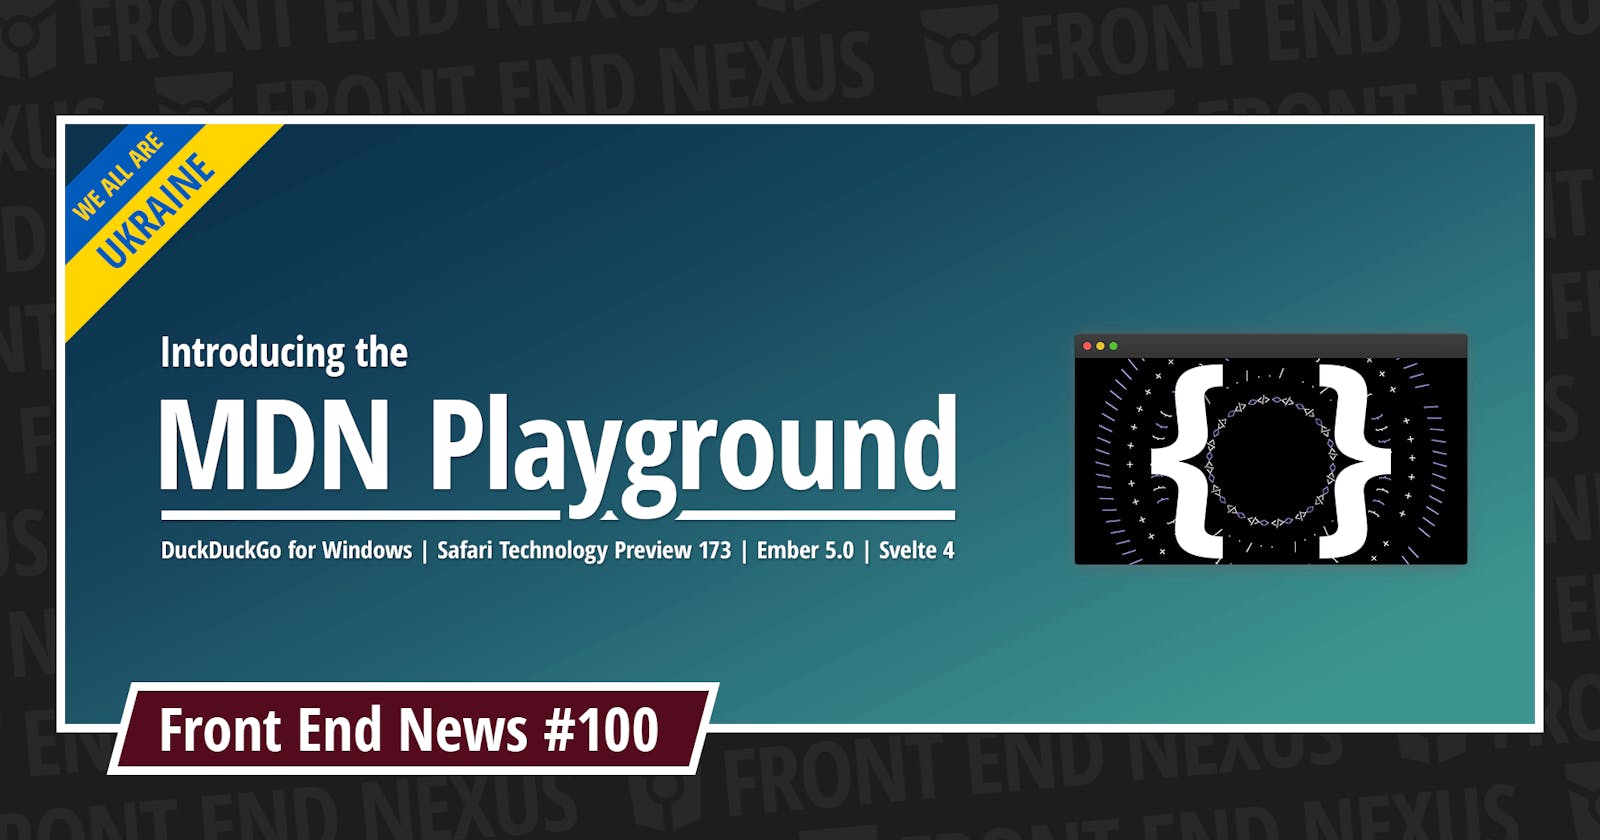 Introducing the MDN Playground, DuckDuckGo for Windows, Safari TP 173, Ember 5.0, Svelte 4, and more | Front End News #100